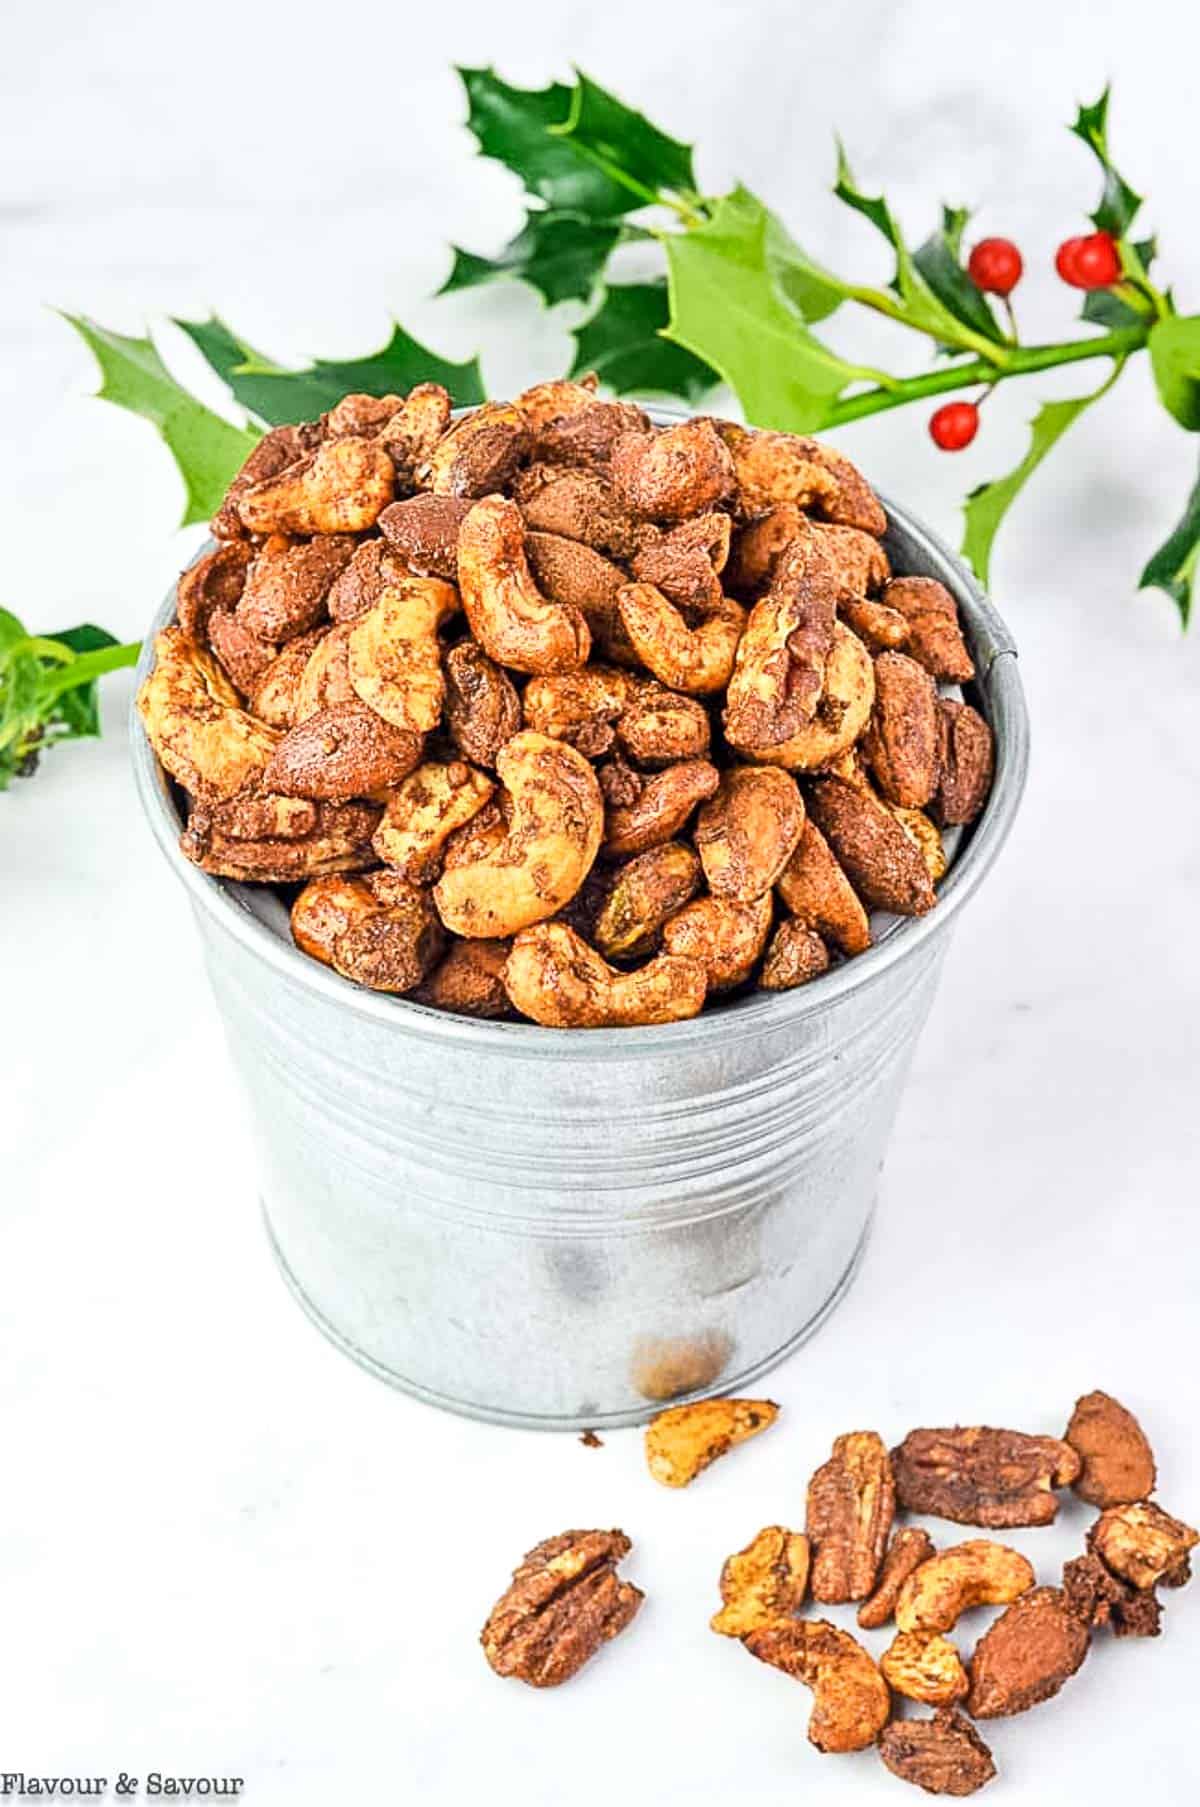 A tin of gingerbread spiced nuts and a sprig of fresh holly.